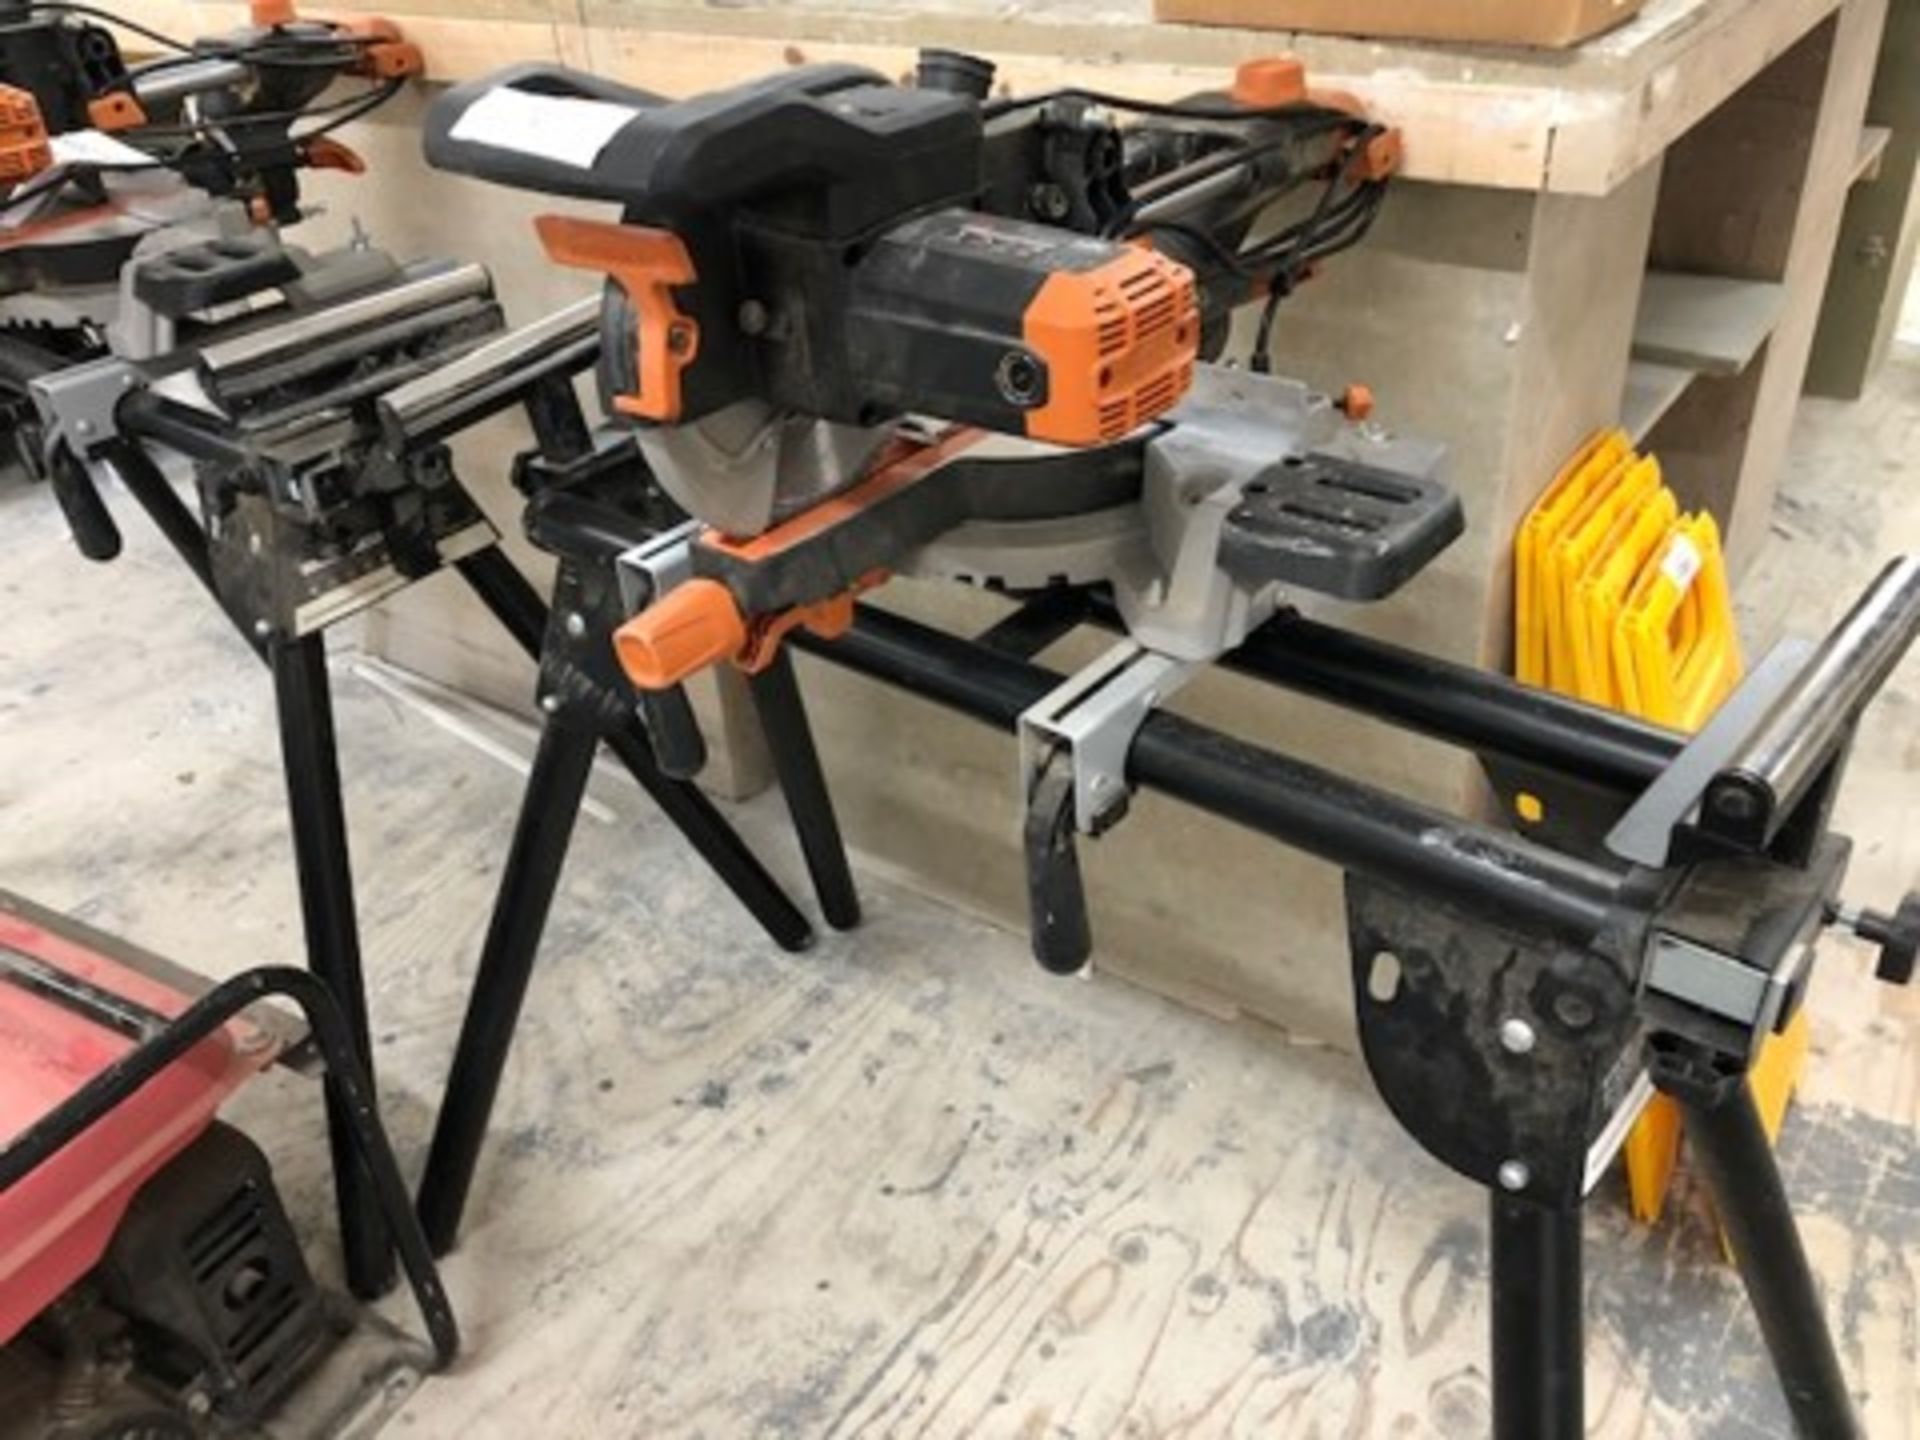 *Evolution R255 Mitre Saw with dedicated stand